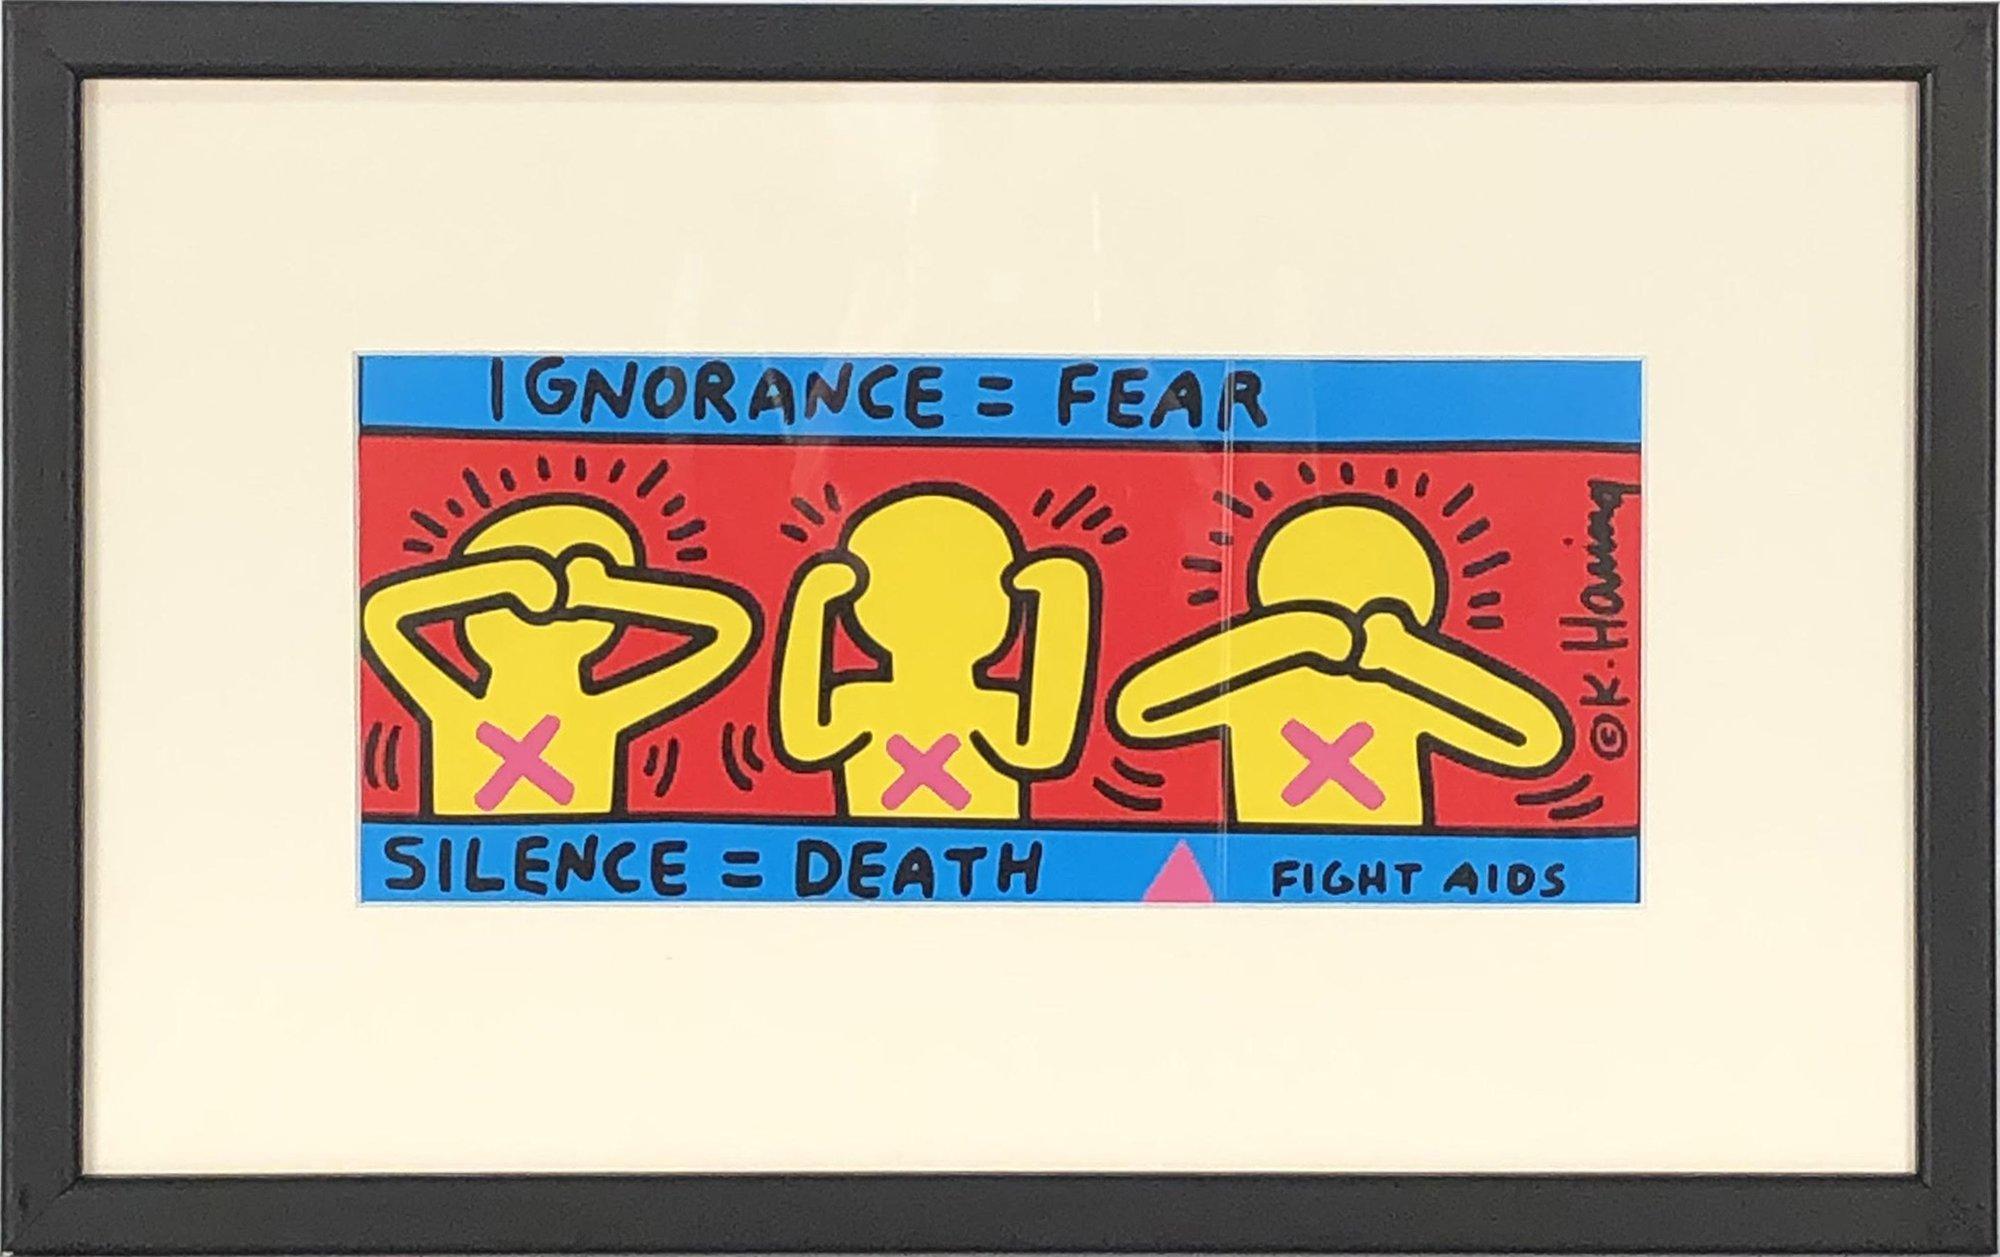 Paper Size: 9 x 14.25 inches ( 22.86 x 36.195 cm )
 Image Size: 4 x 9.25 inches ( 10.16 x 23.495 cm )
 Framed: Yes
 Condition: A-: Near Mint, very light signs of handling
 
 Additional Details: Vintage Keith Haring Postcard Estate Authorized 1998